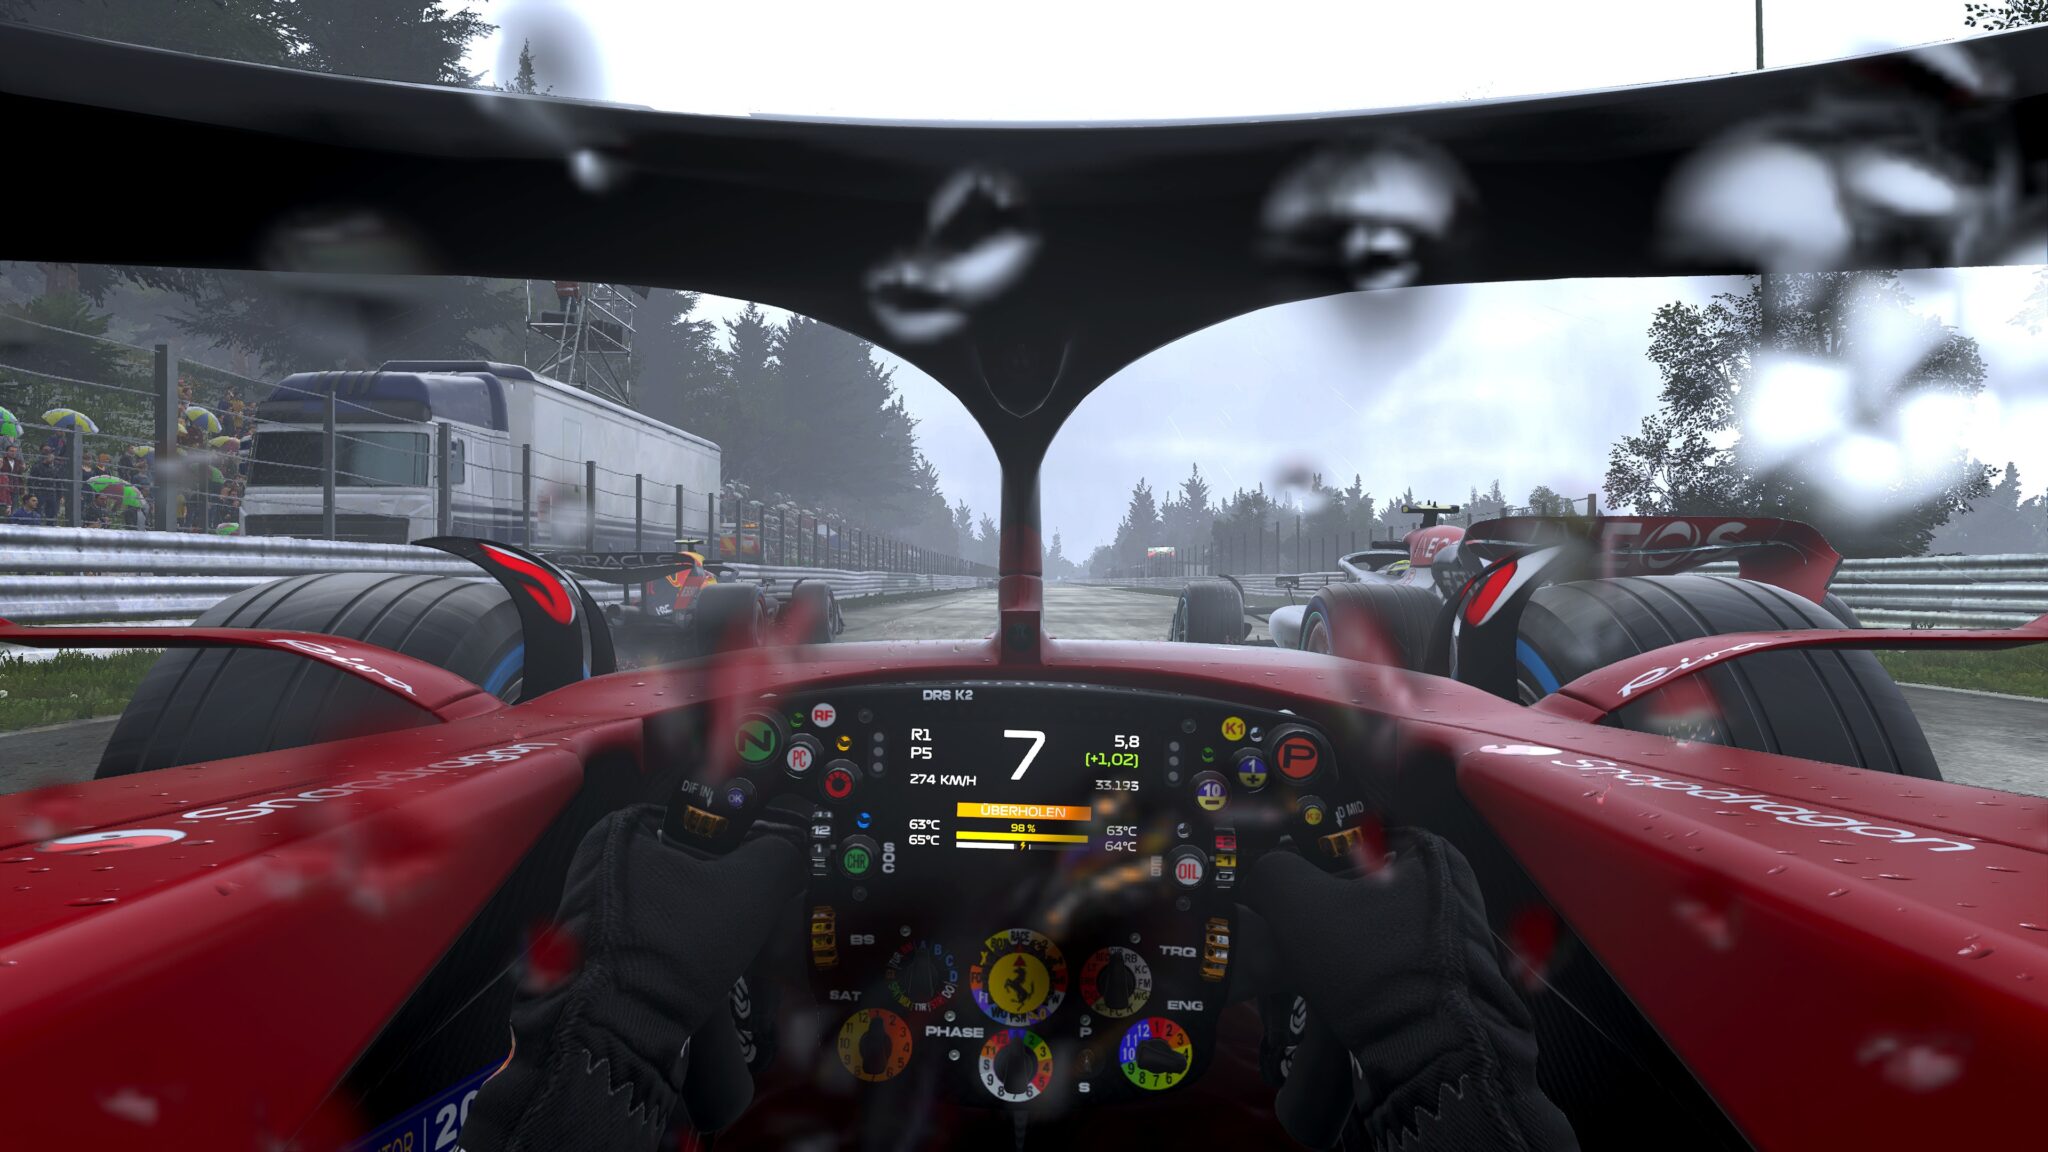 (Especially in the cockpit view, the race action is incredibly immersive and nerve-wracking.)